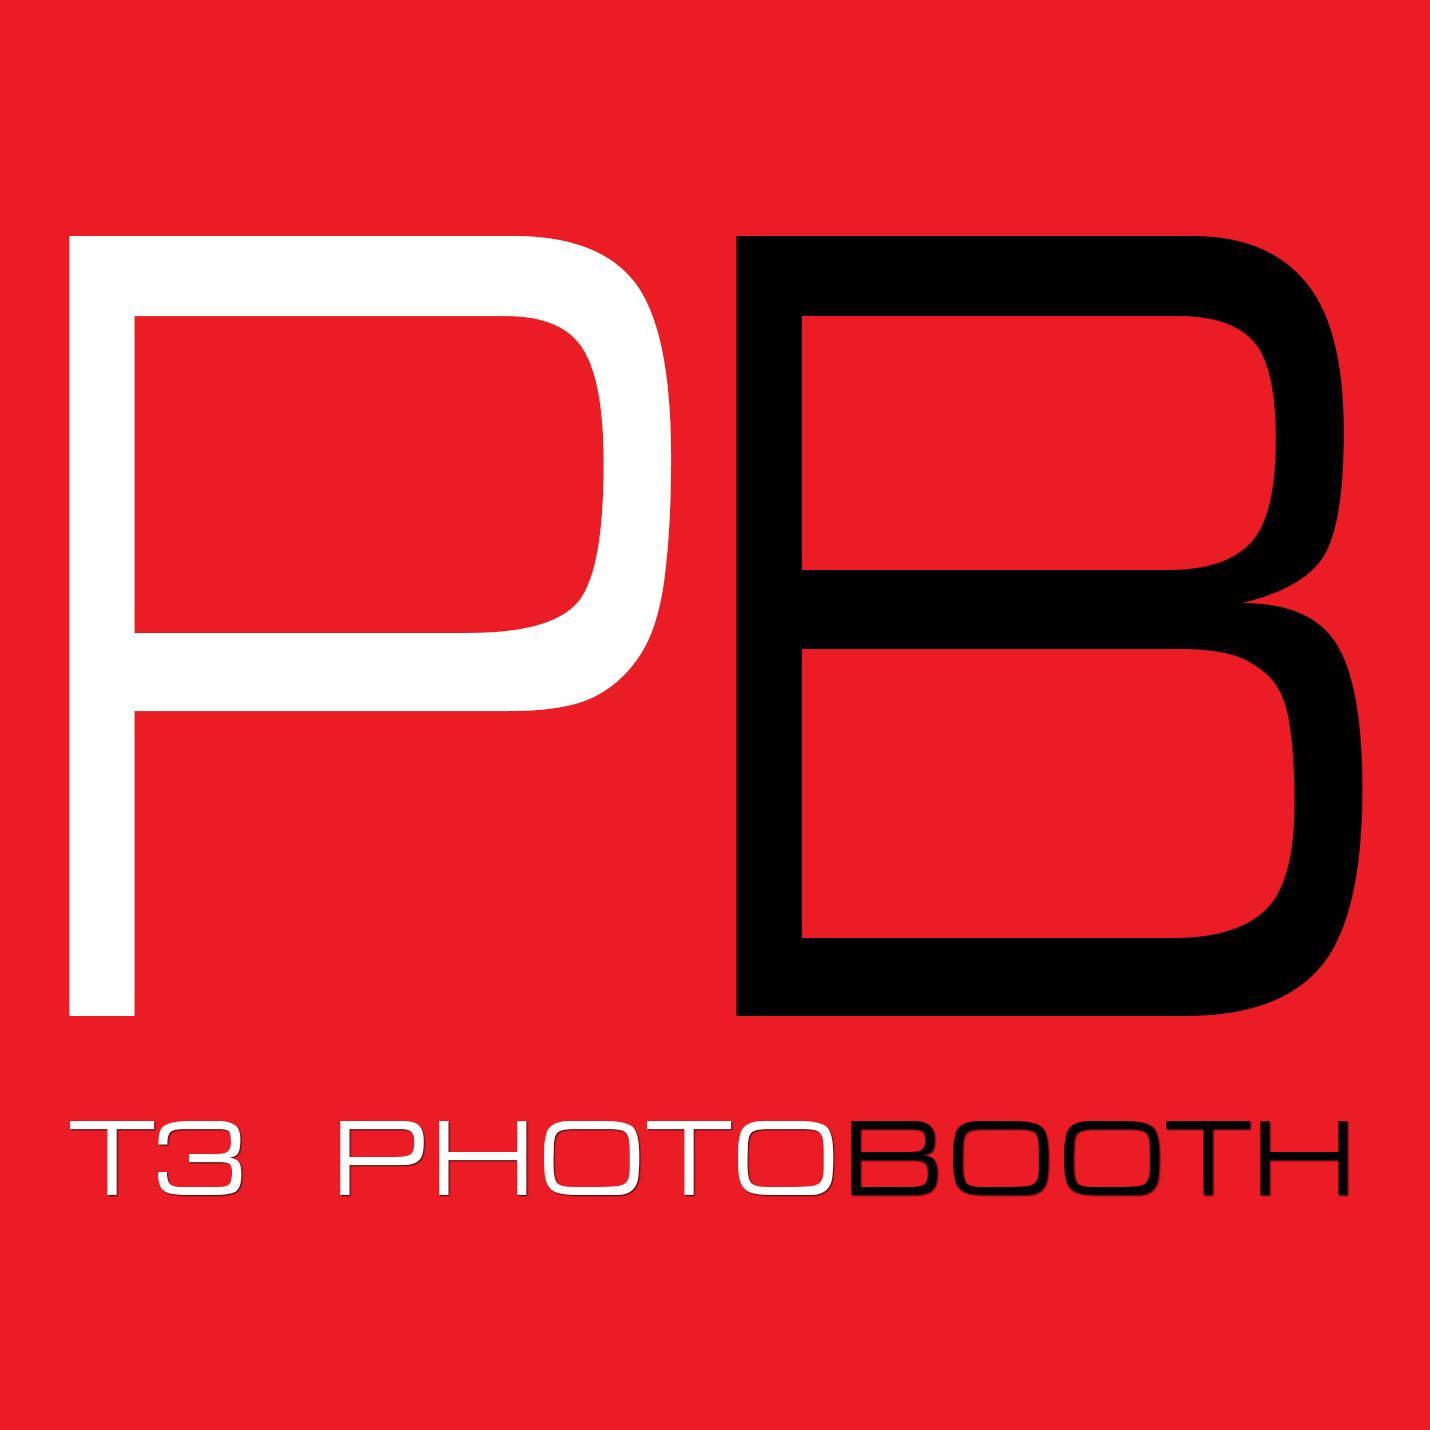 We are the manufacturers of T3 Photo Booths